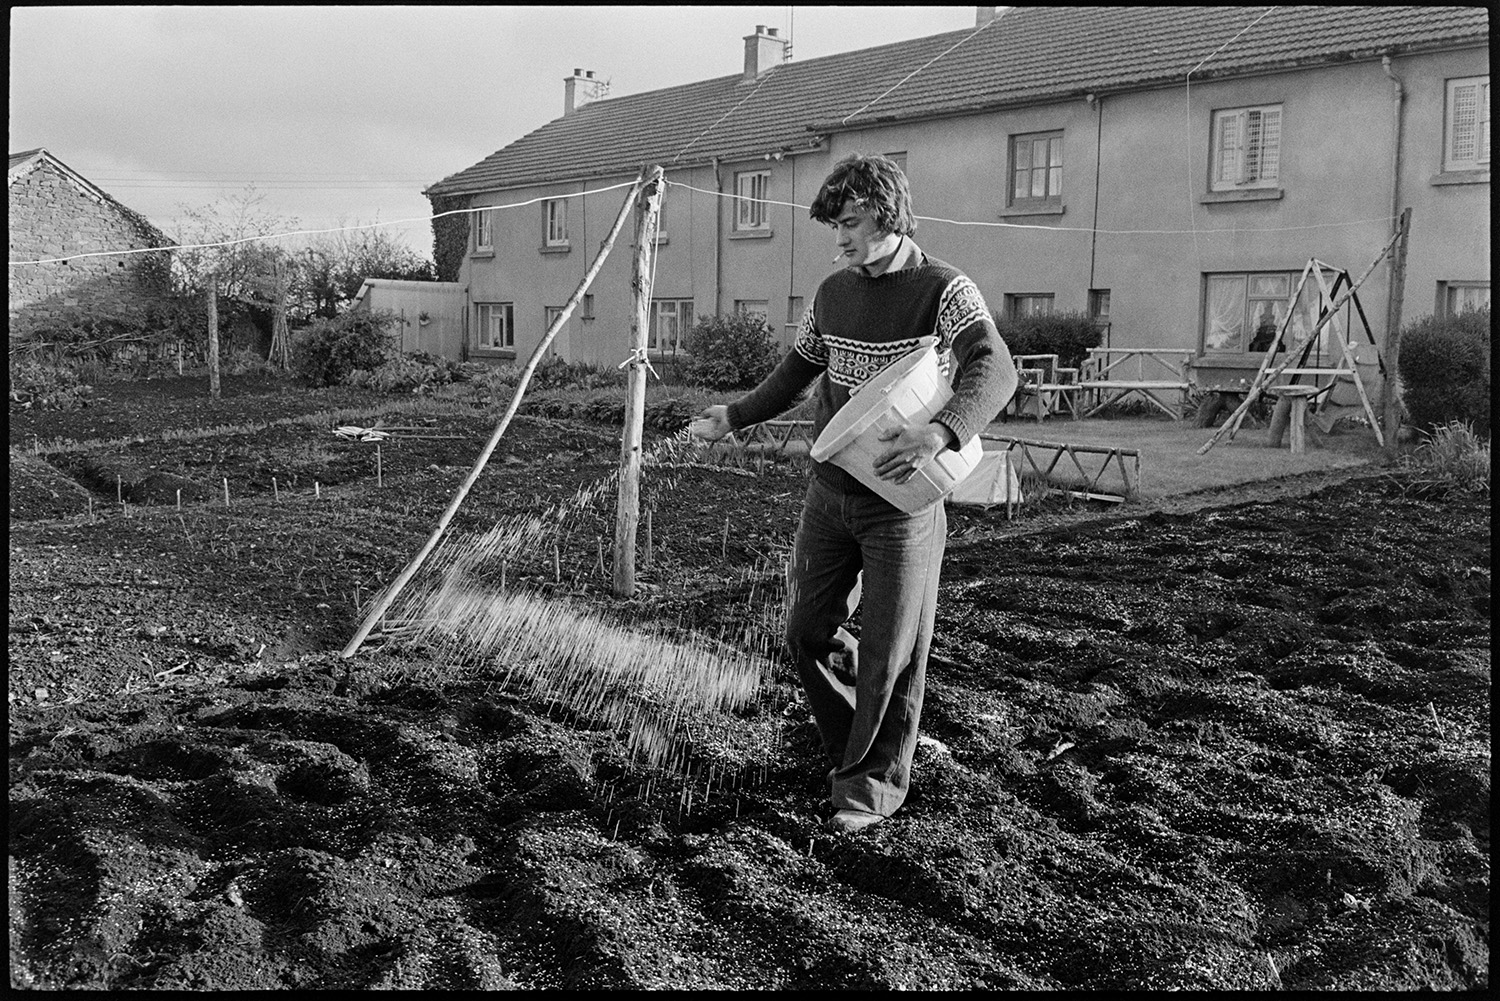 Man sowing seeds or fertilizer in garden. 
[A man sowing or broadcasting seeds or fertilizer, from a bucket by hand, in a garden at Tricks Terrace, Beaford. Terraced houses are visible in the background.]